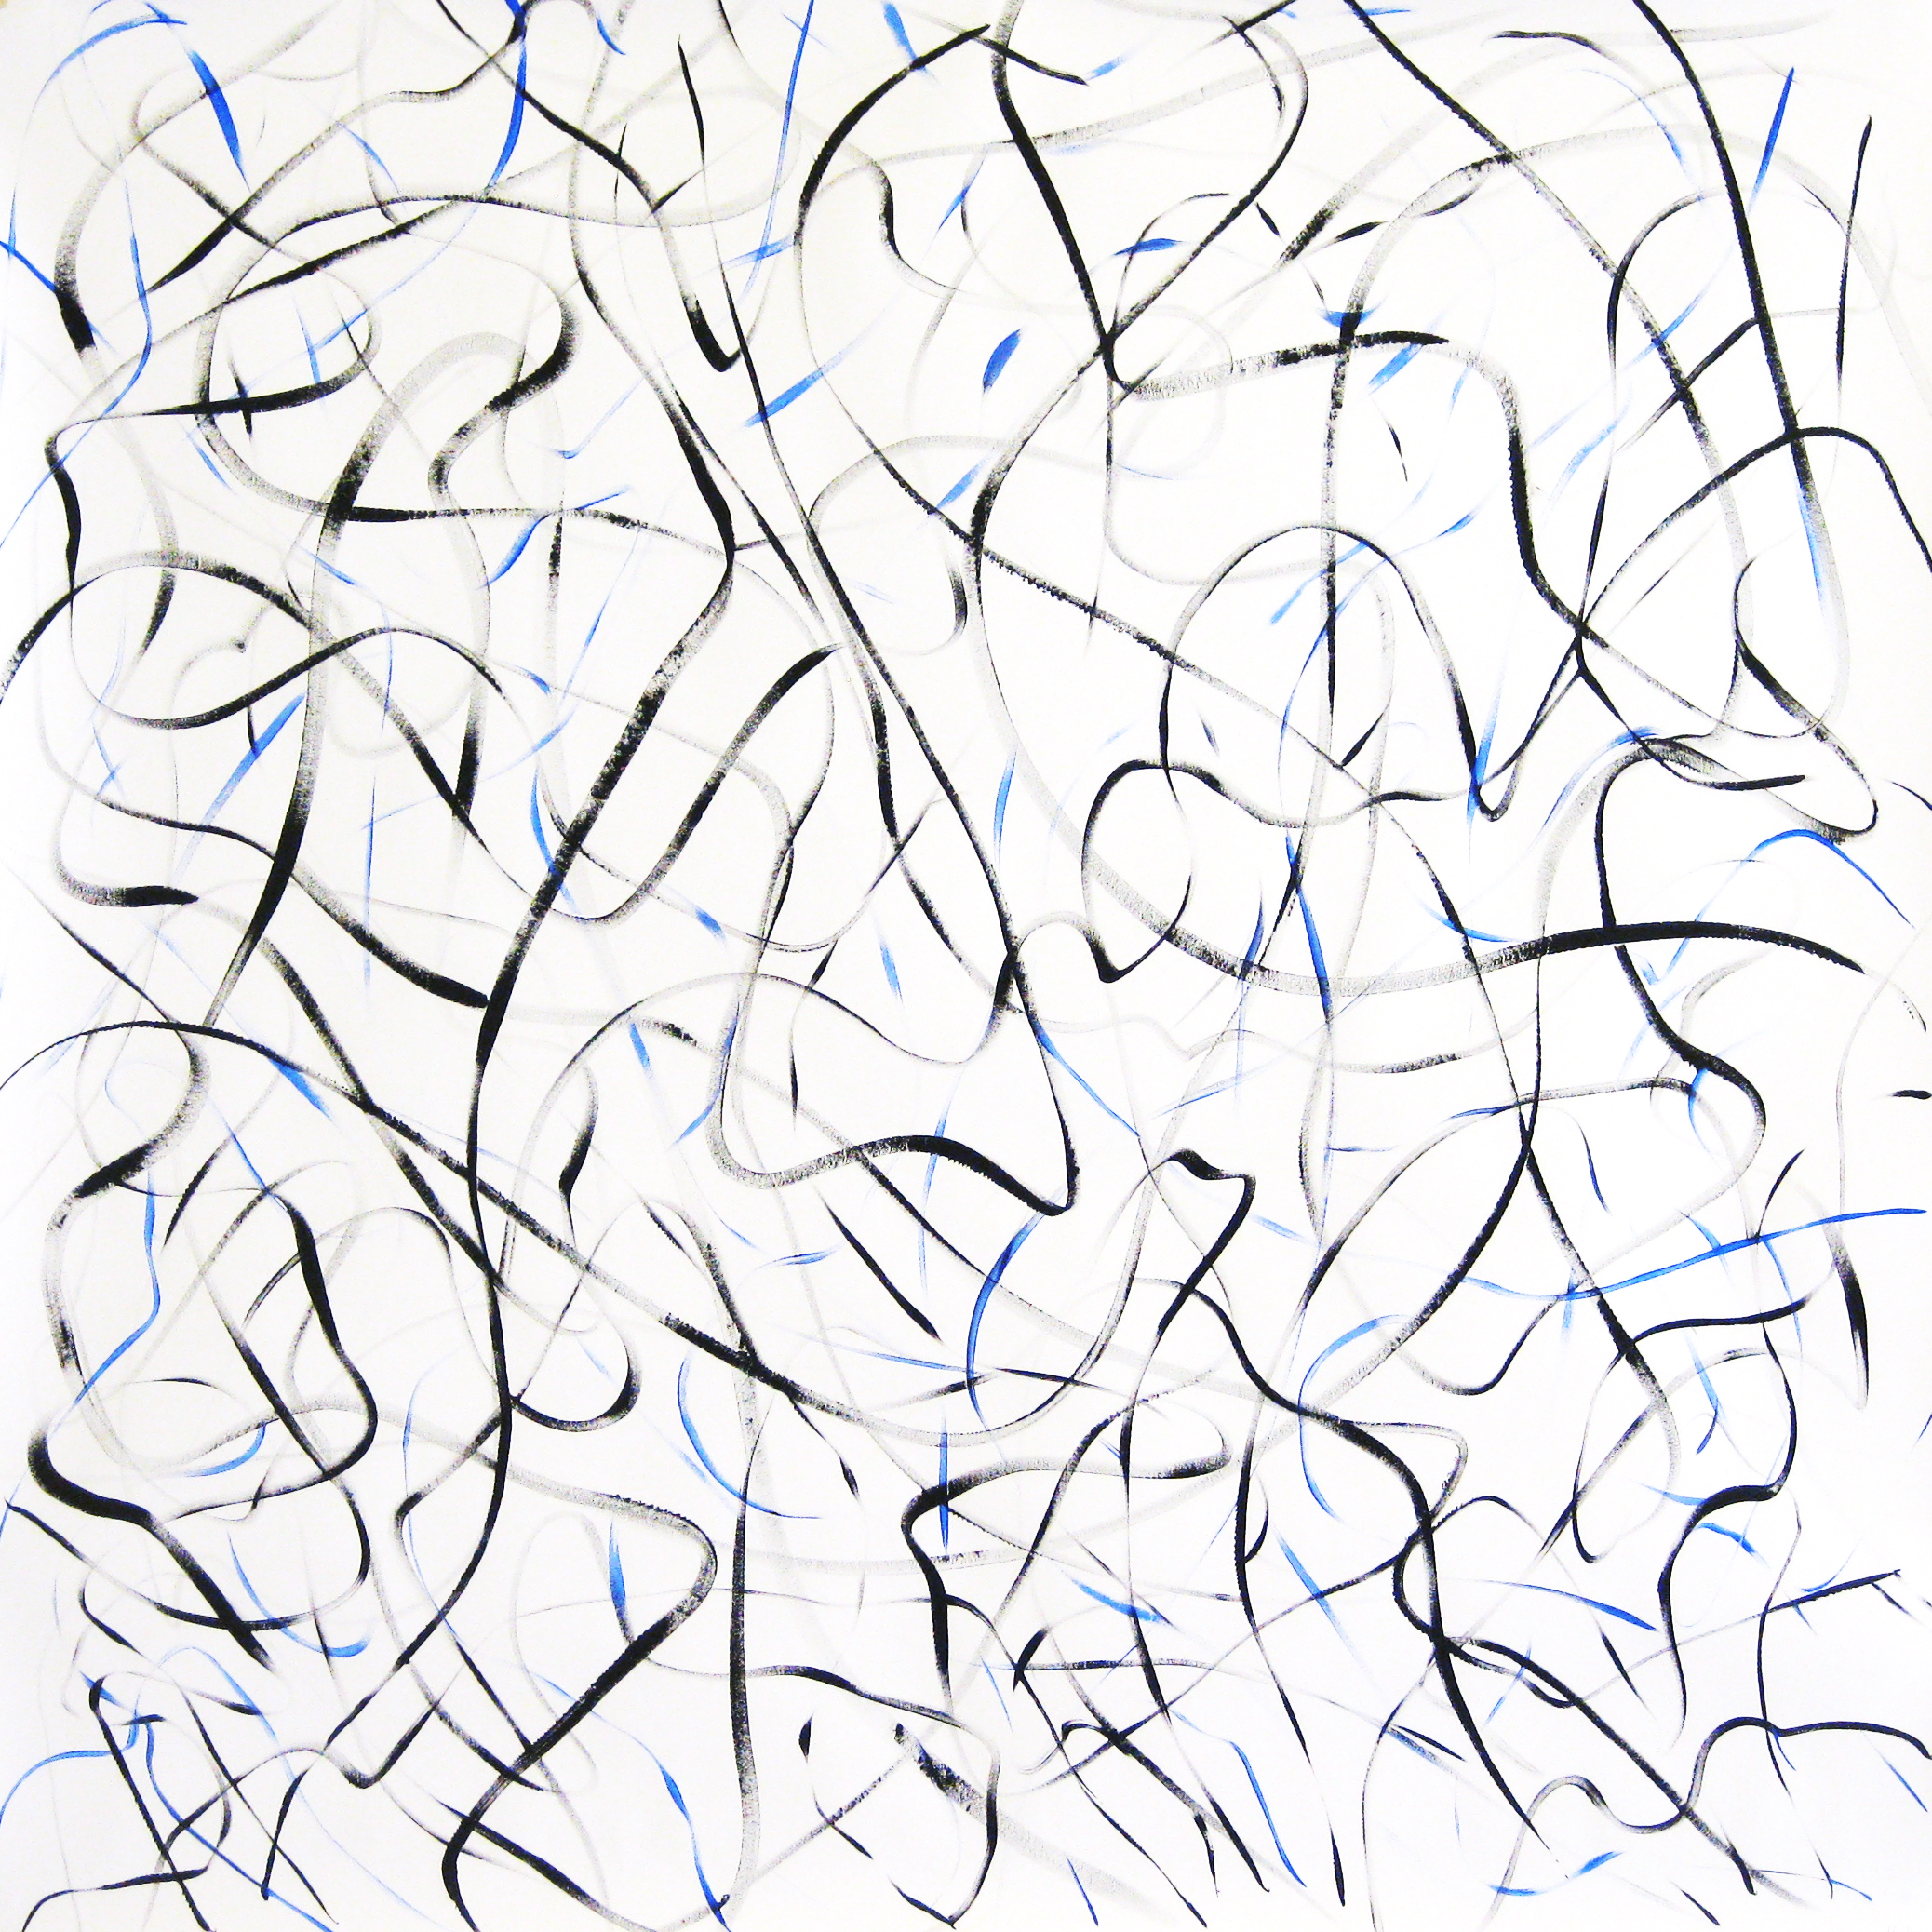  Untitled, 2015 acrylic on paper 100 x 100 cm (14-15) 